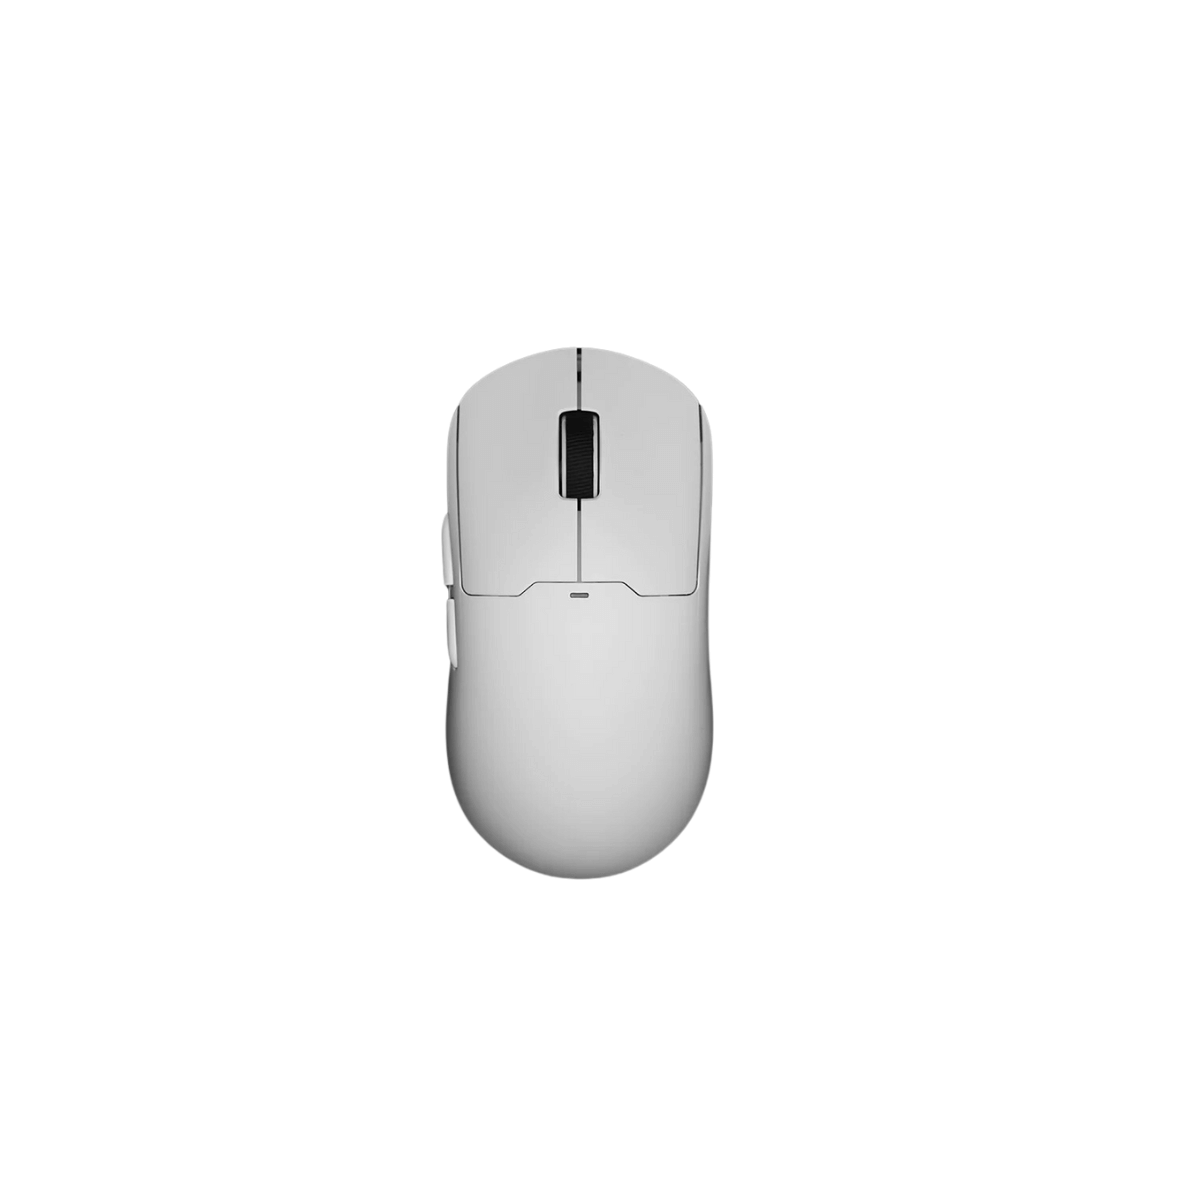 Affordable and less expensive mouse for gaming and regular use at Cheaper price.